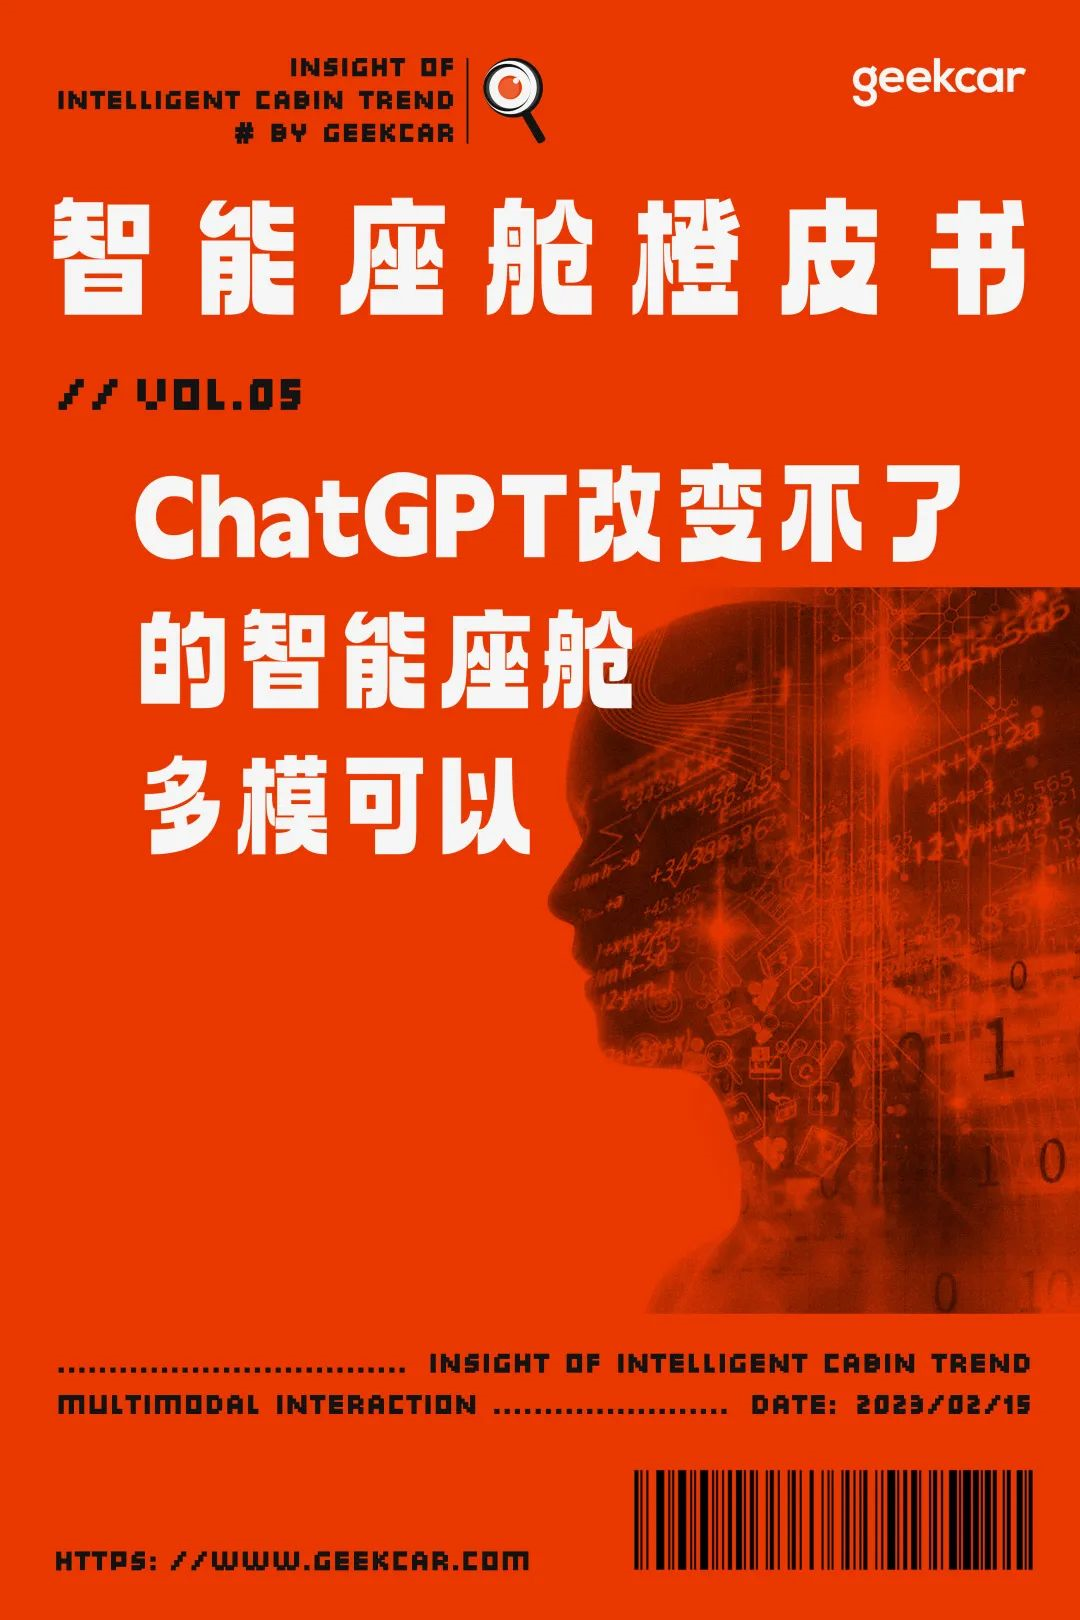 Orange Book | Cabin Interaction: ChatGPT Cannot Change Intelligent Cabin, but Multi-mode Can.